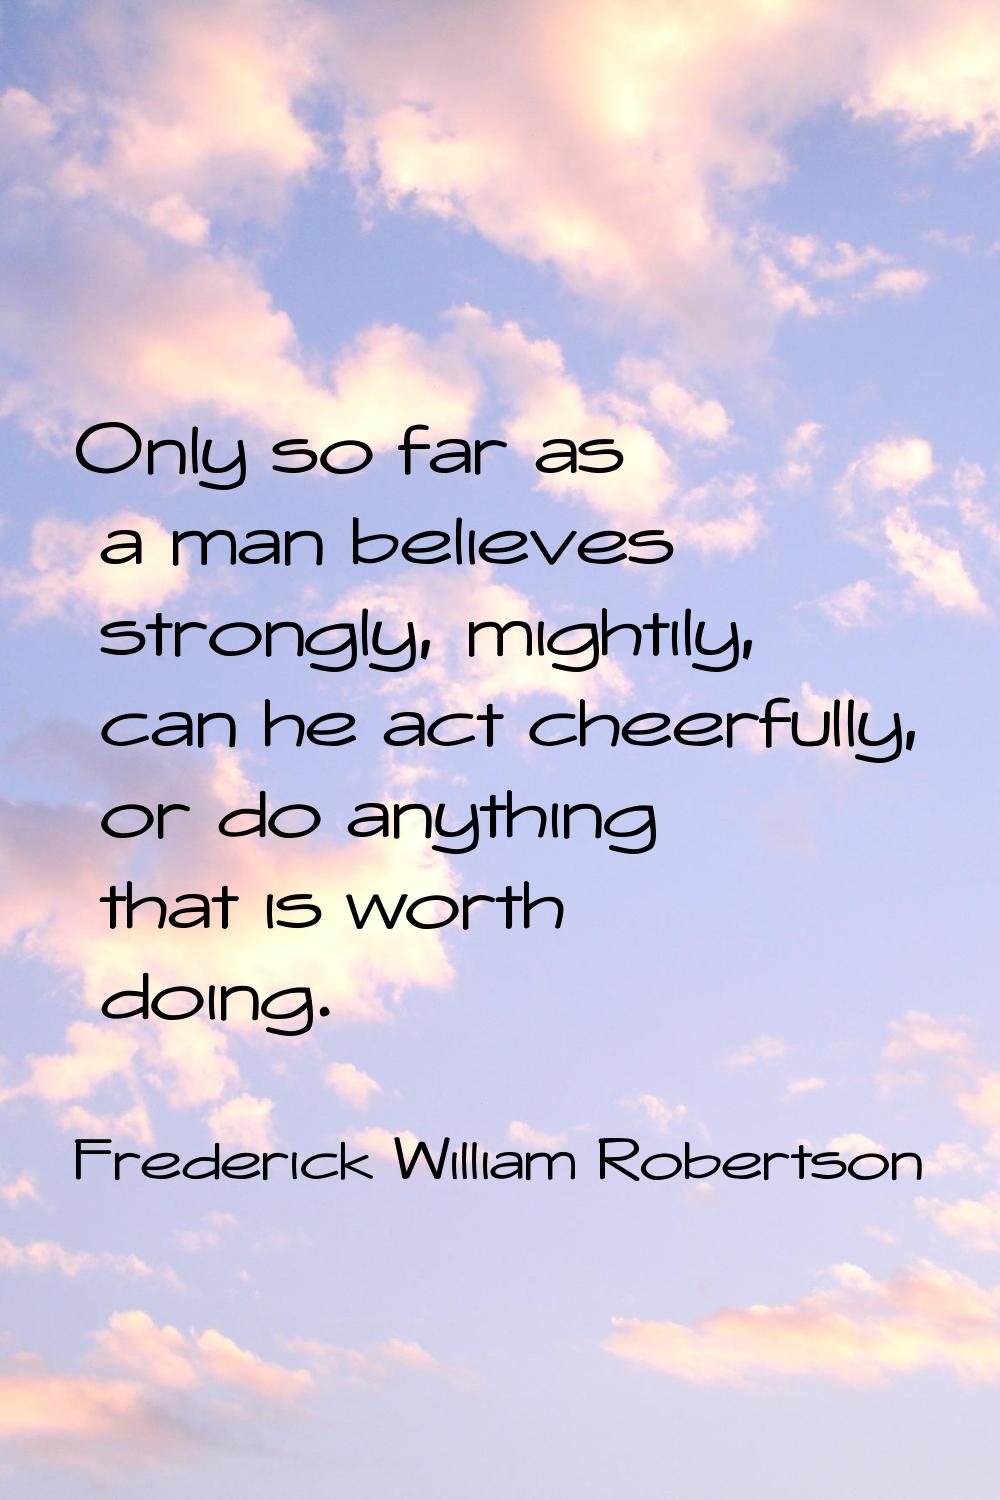 Only so far as a man believes strongly, mightily, can he act cheerfully, or do anything that is wor